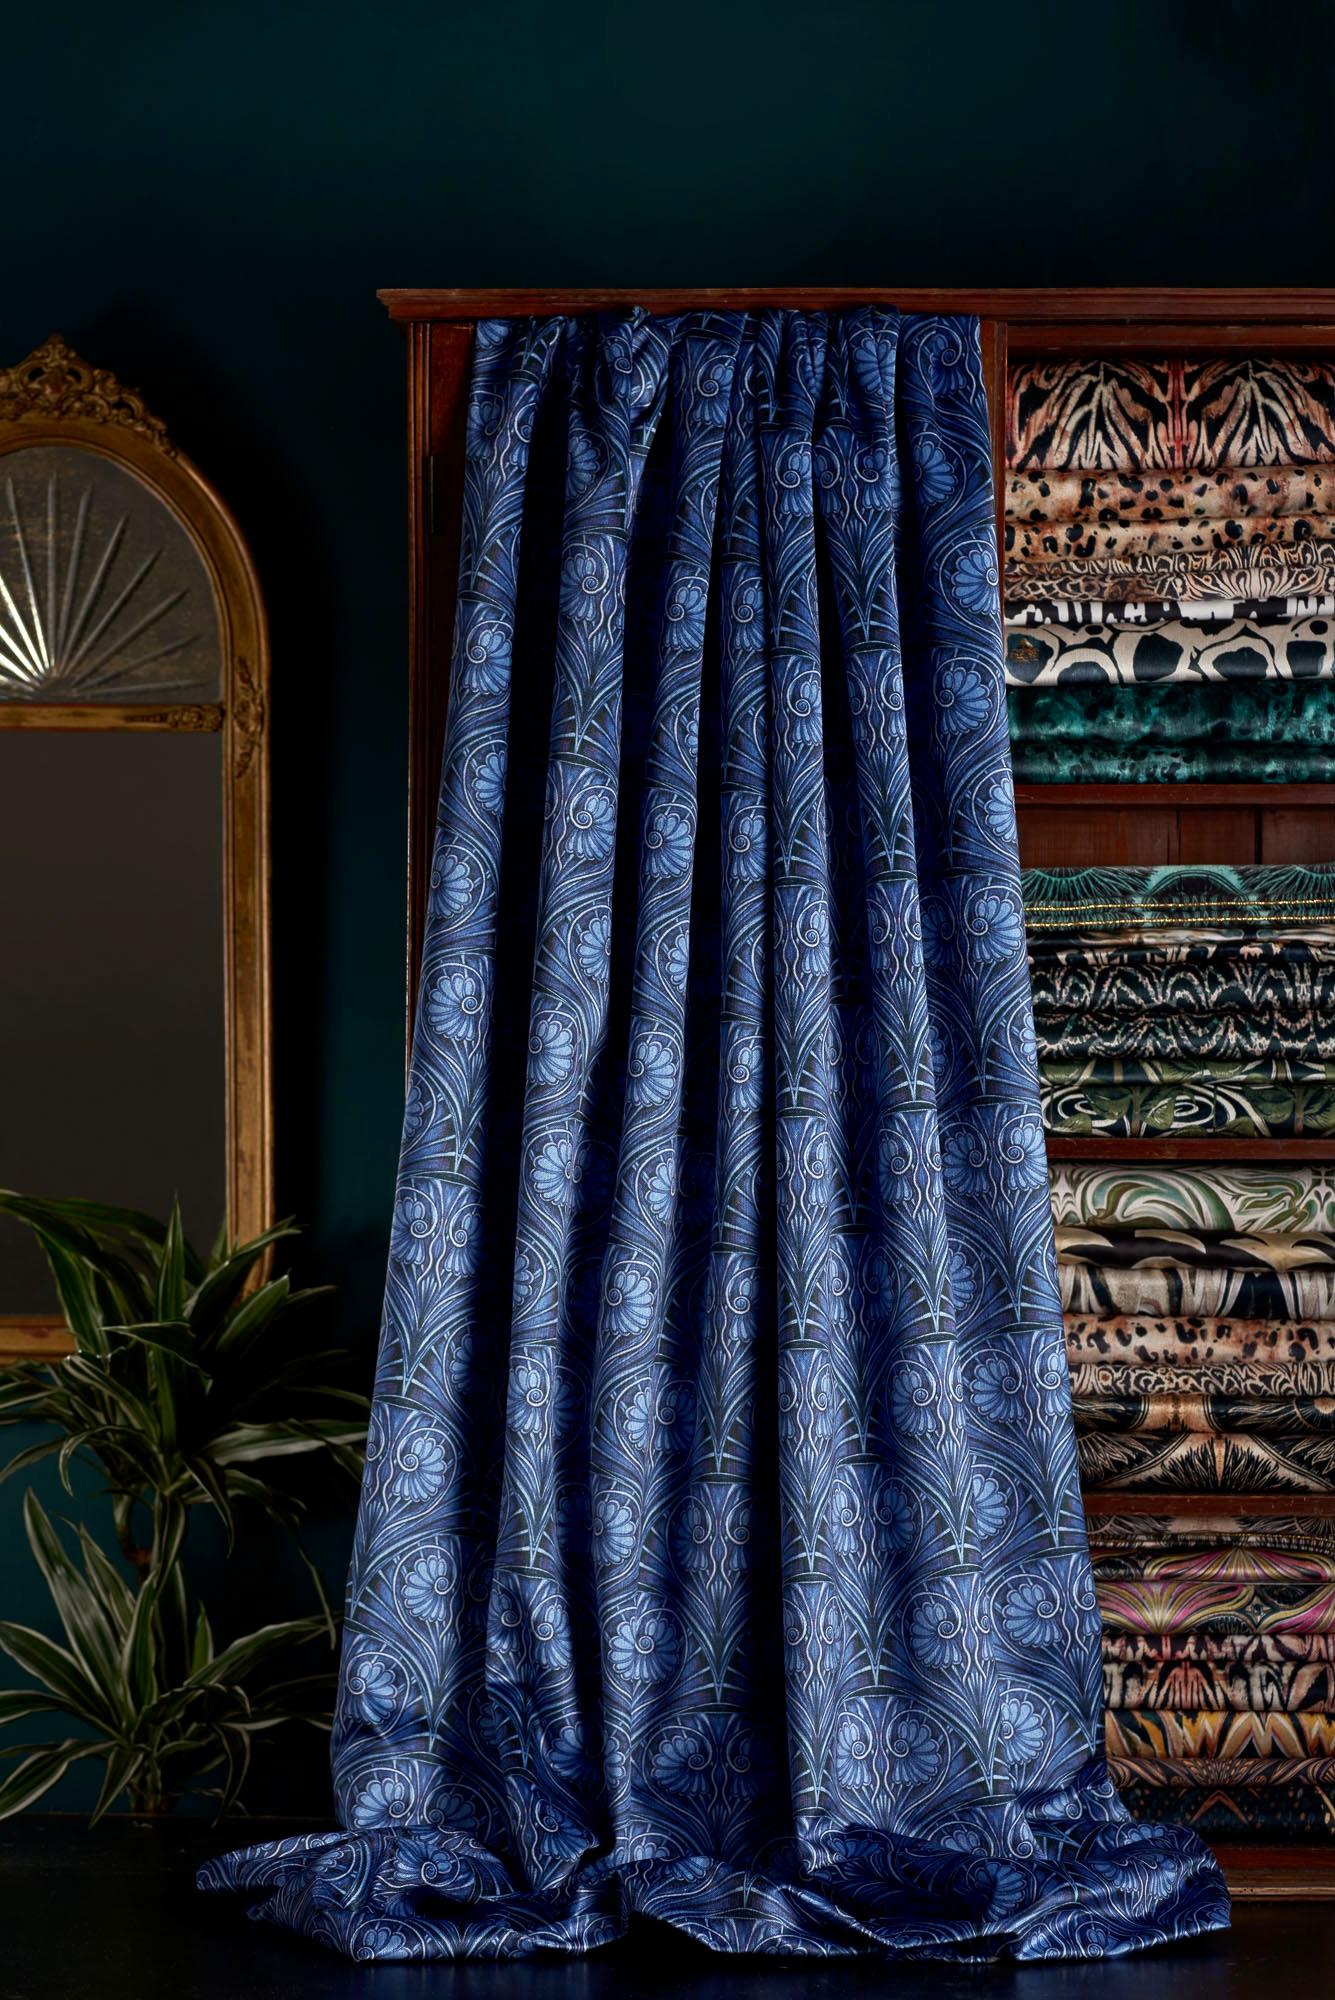 A beautifully immersive design in a vivid electric blue. Picking up on Anna’s love of Art Nouveau, this design was hand painted in a feminine scallop pattern.

This velvet is midweight, with a strong straight woven backing, so is suitable for